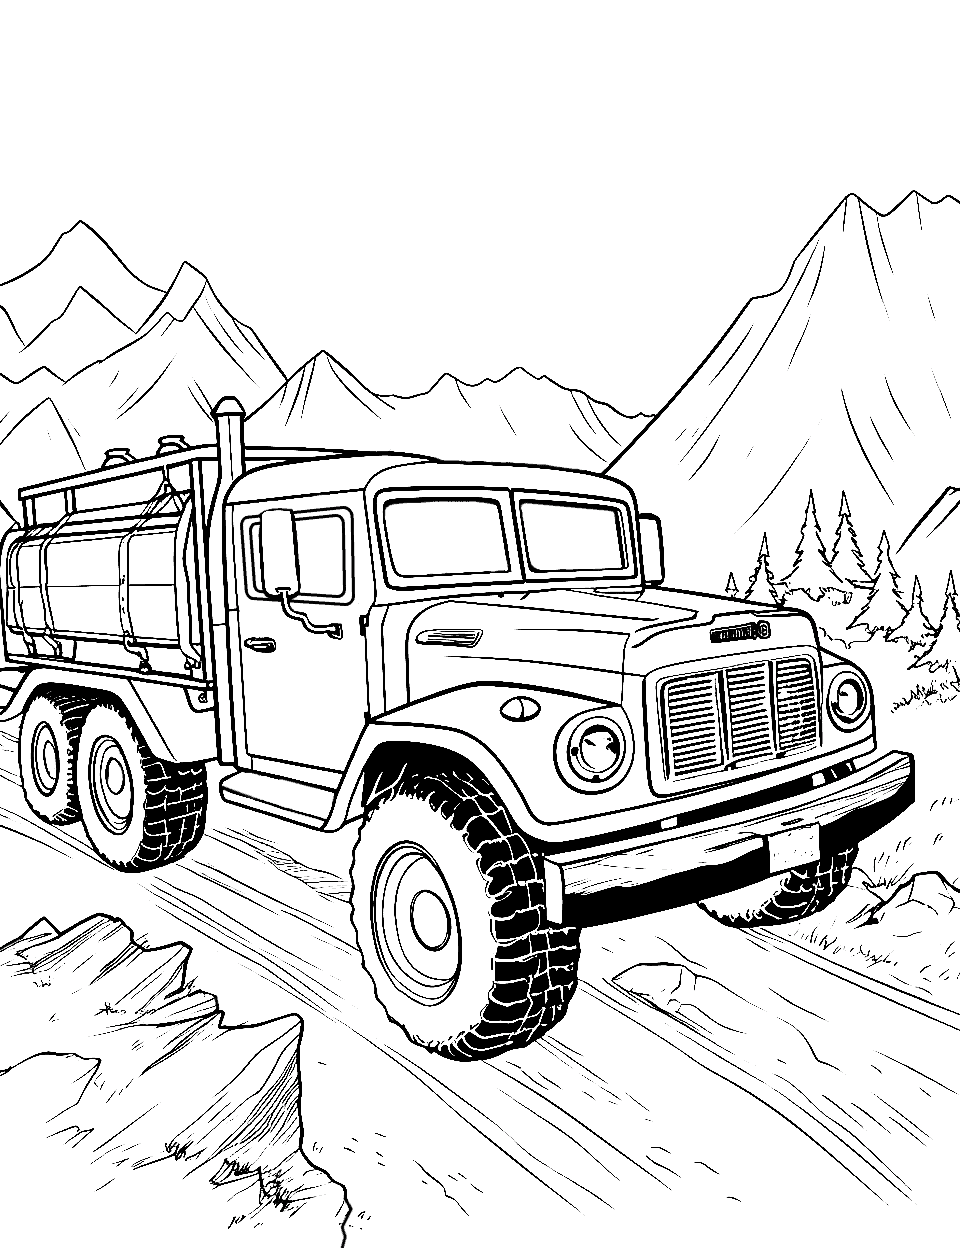 50 Truck Coloring Pages: Free Printable Sheets